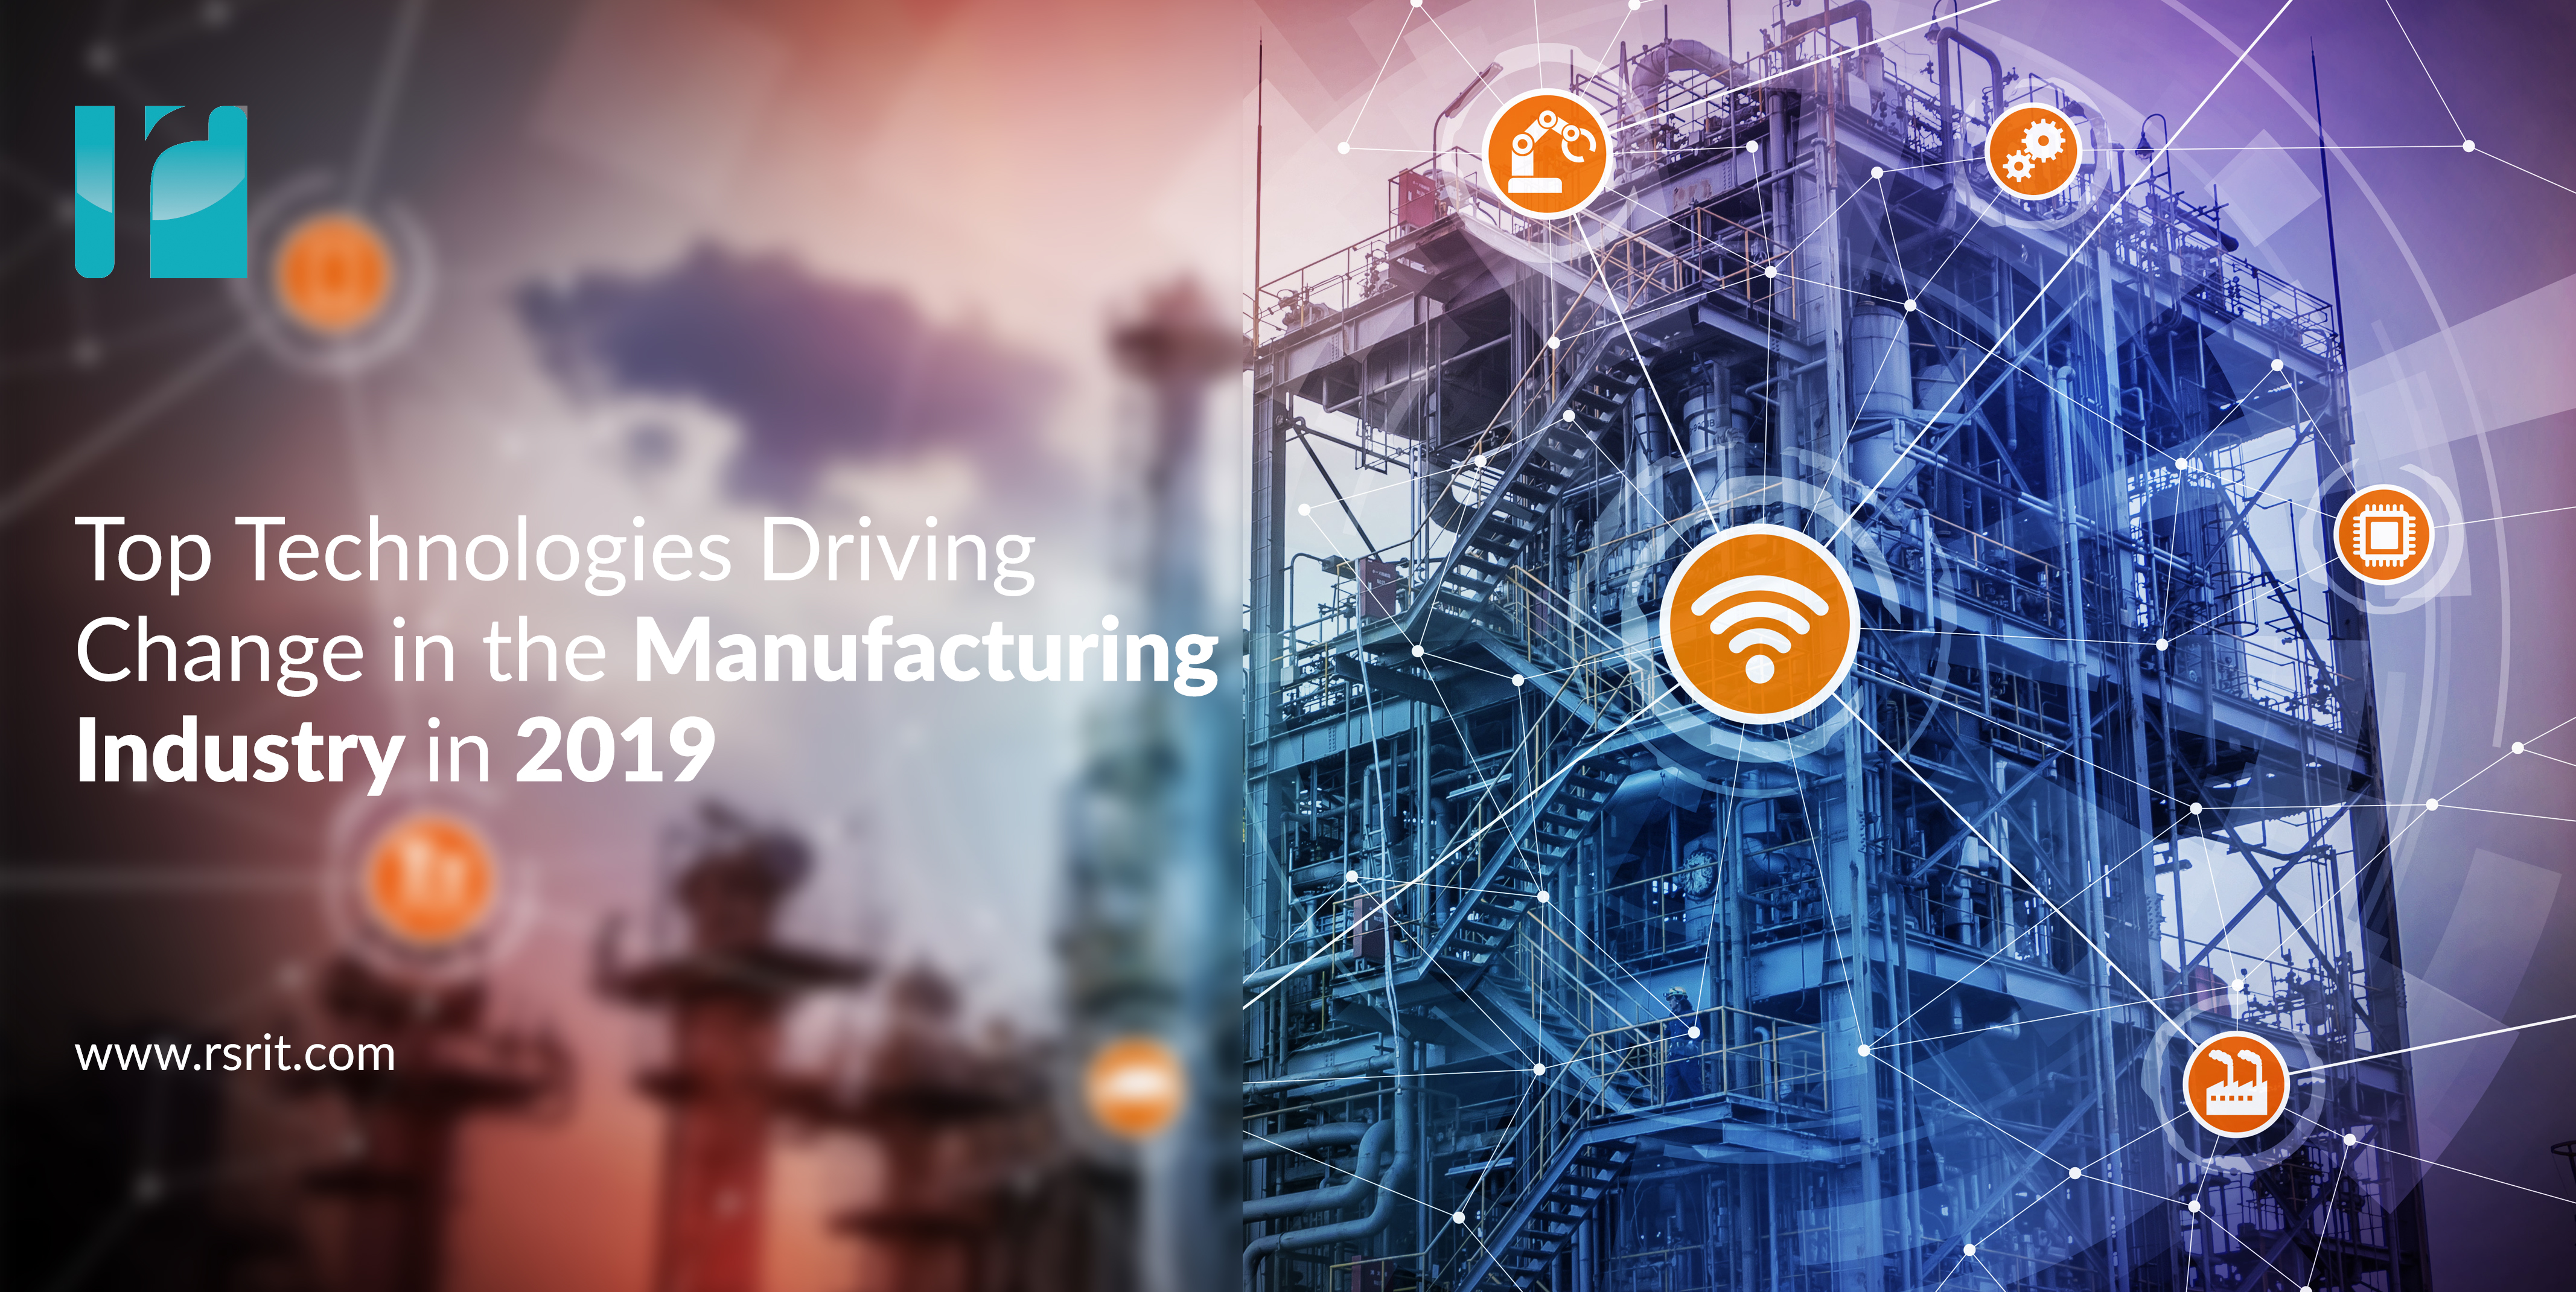 Top Technologies Driving Change in the Manufacturing Industry in 2019